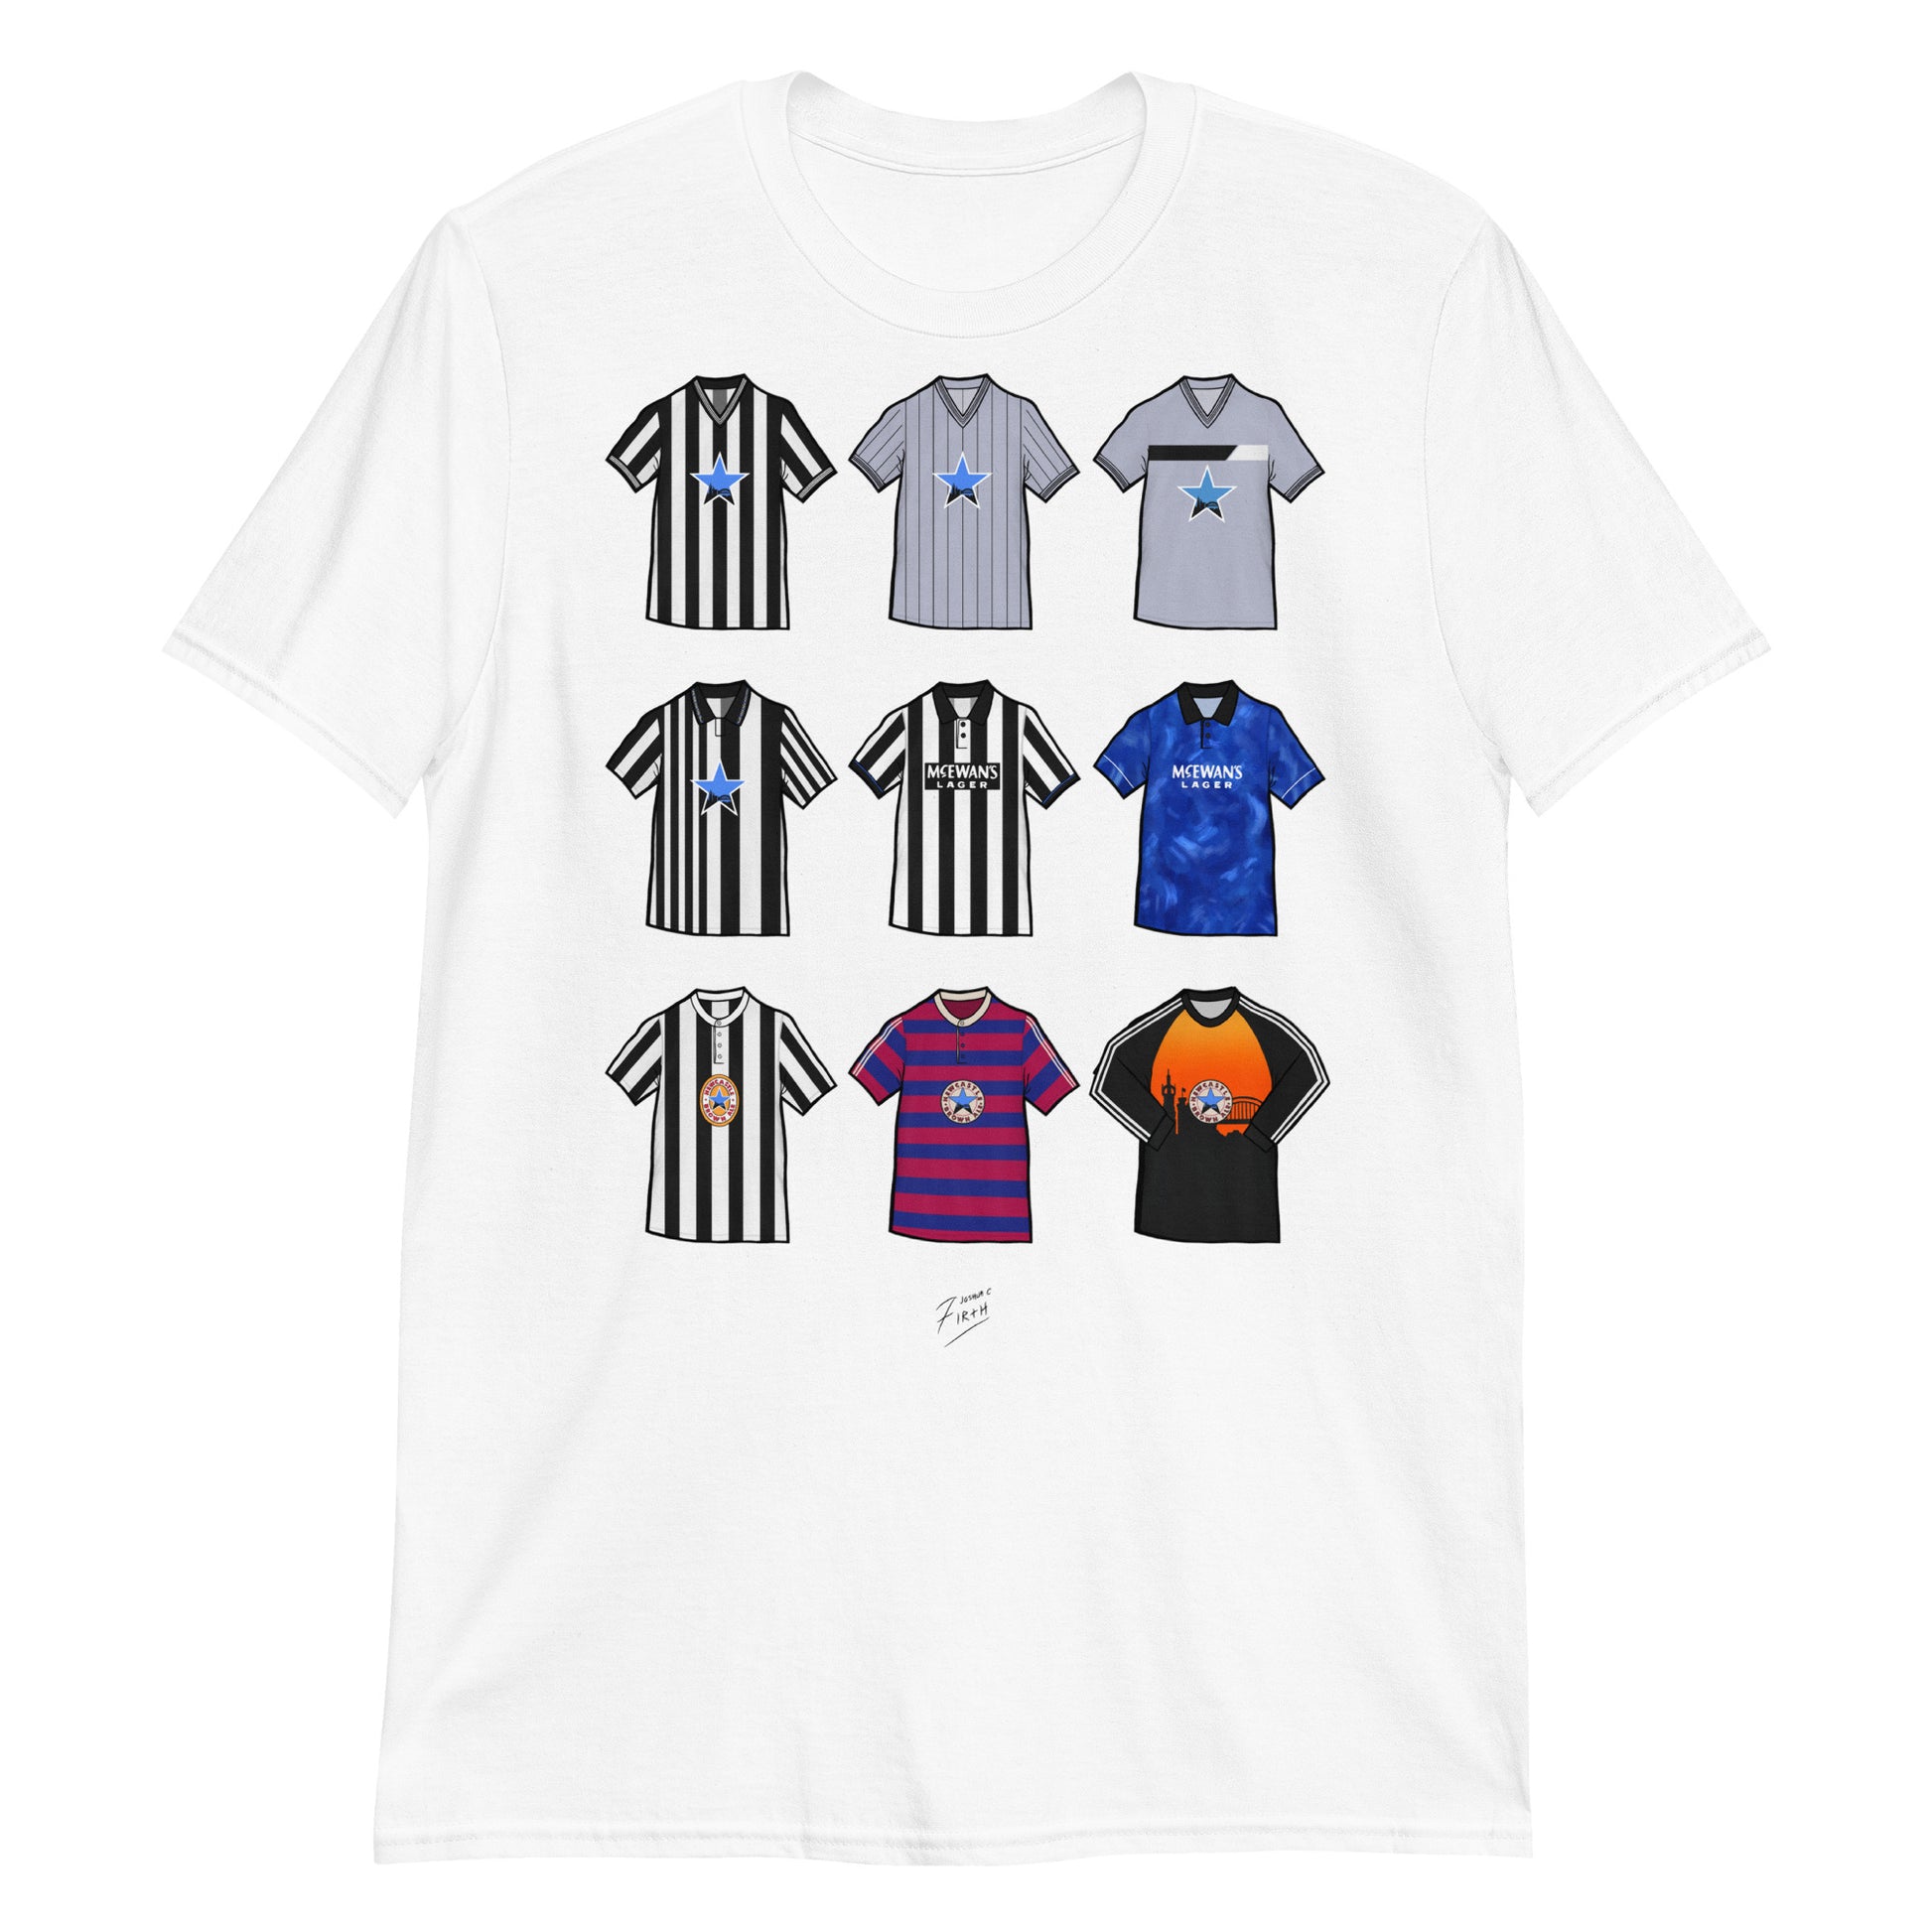 White T-shirt inspired by Newcastle United jersey's of the past, retro Iconic designs